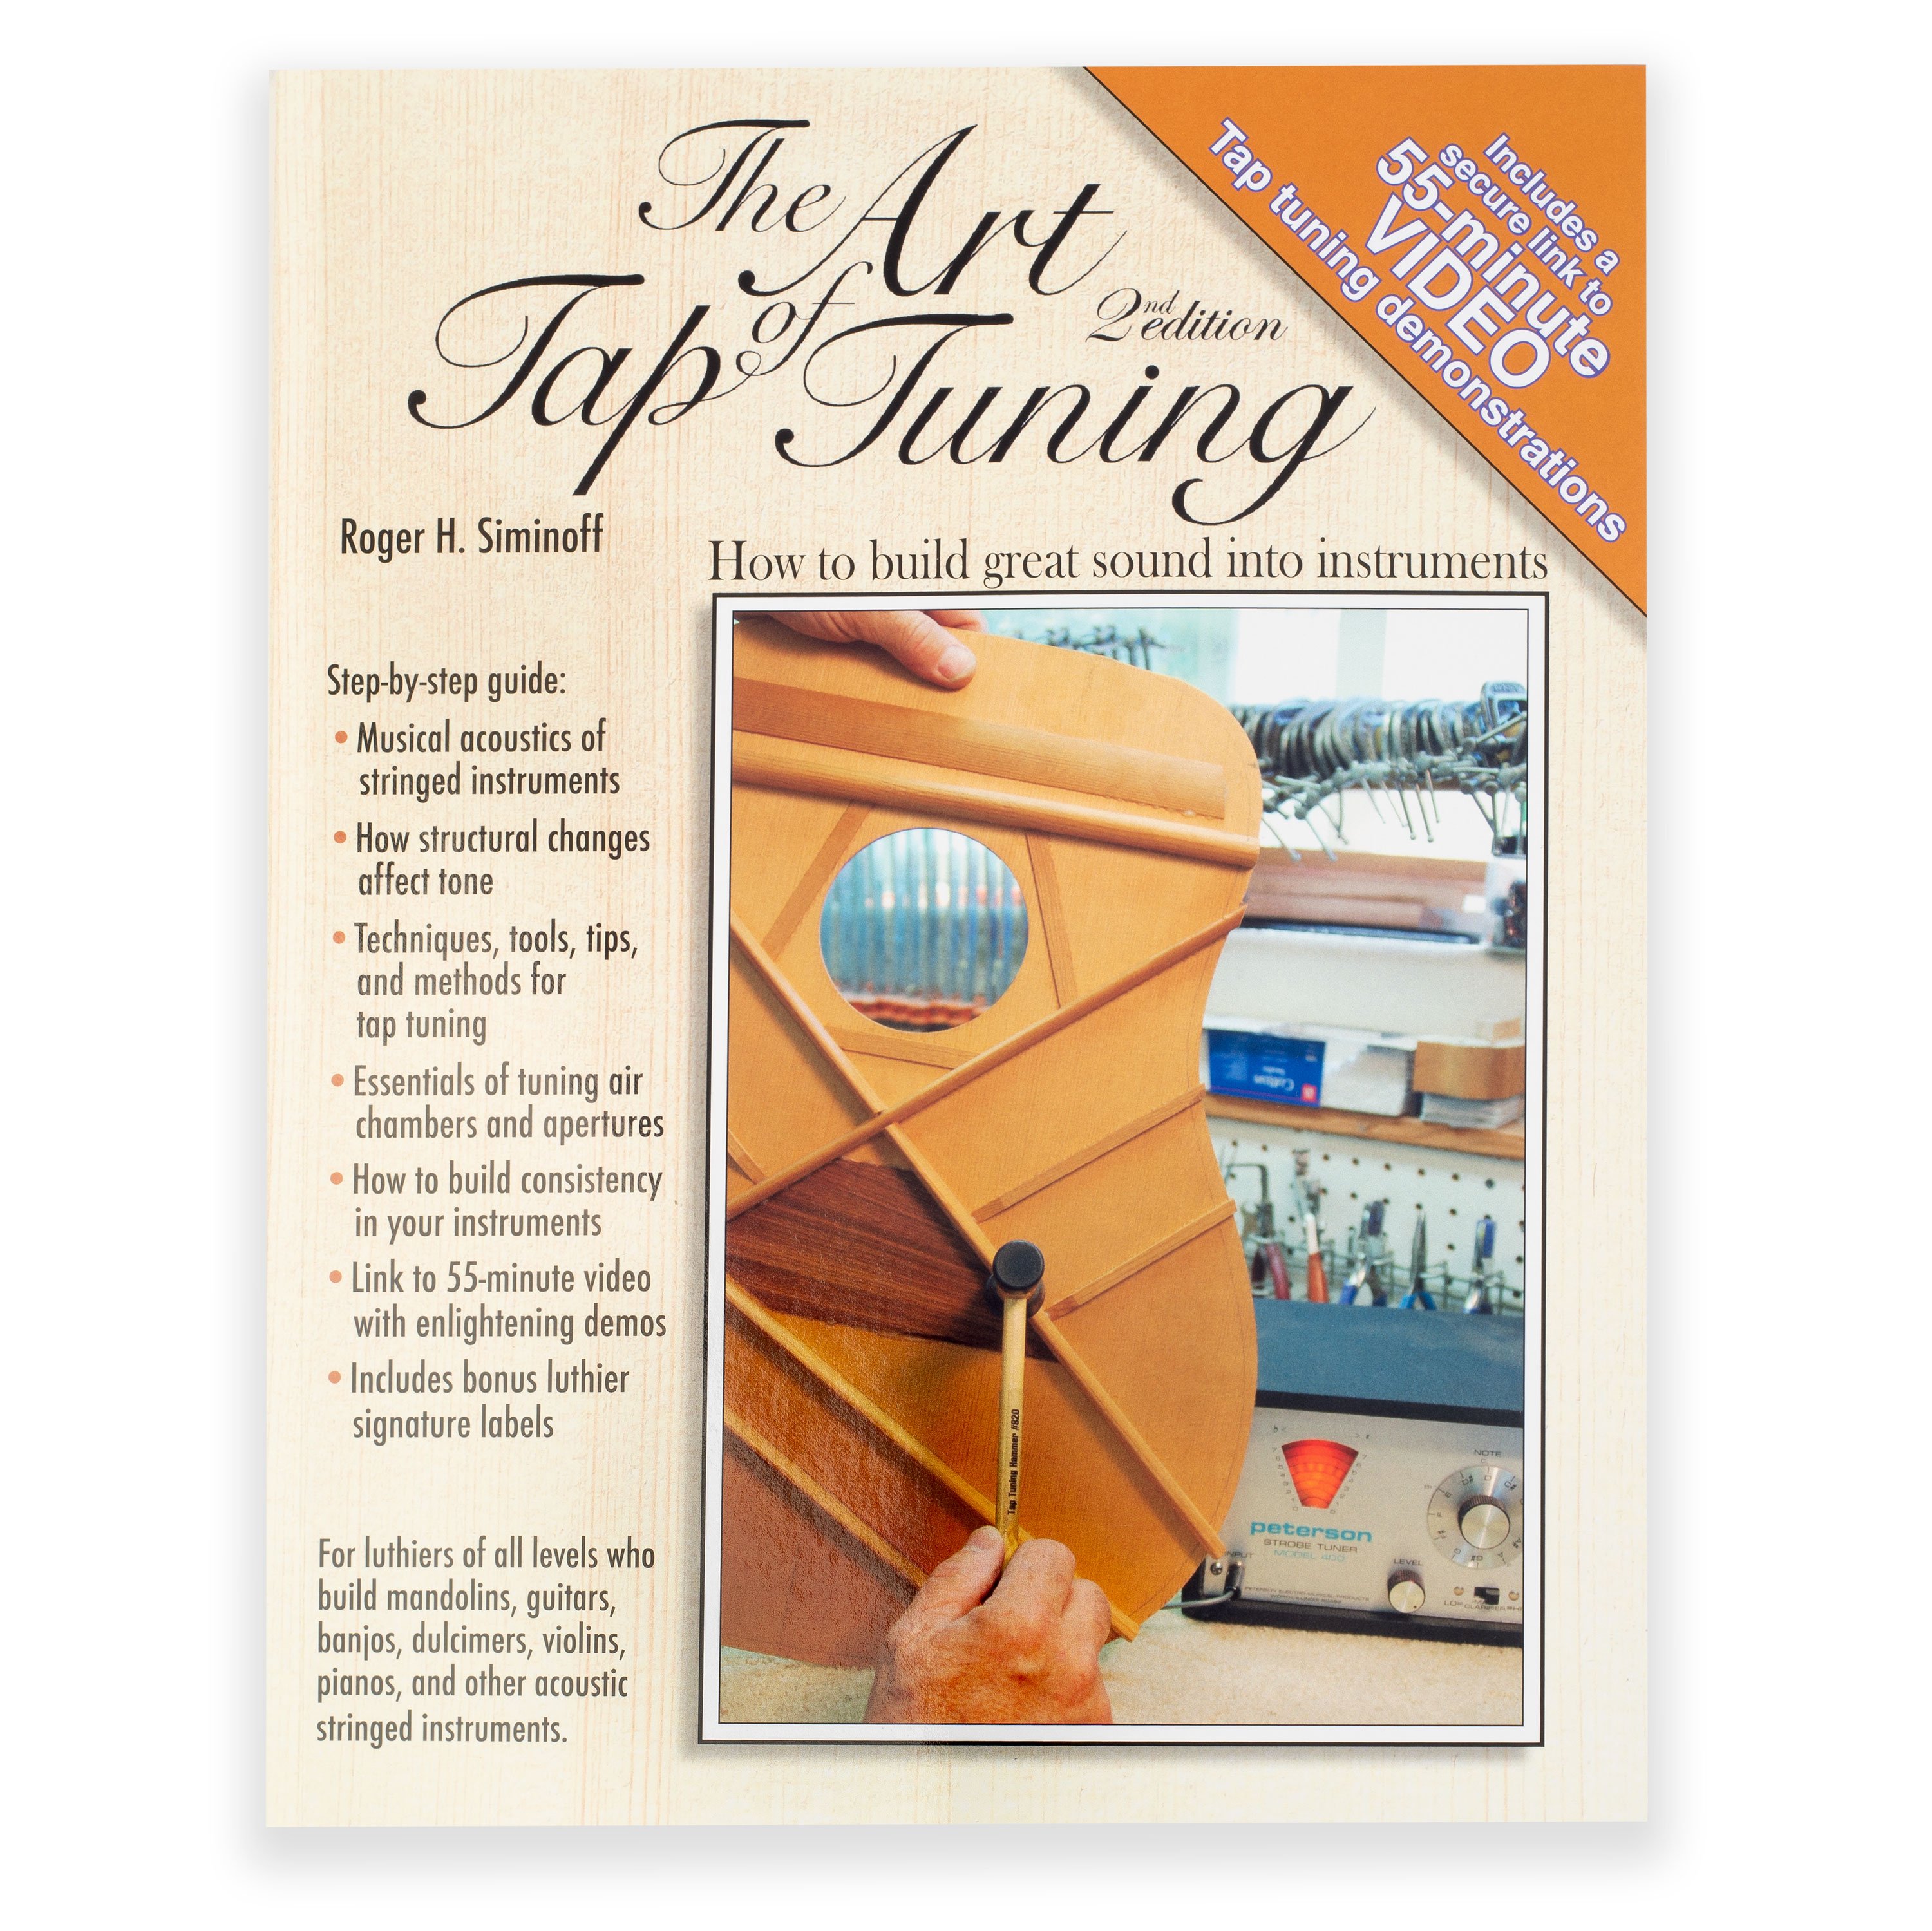 The Art of Tap Tuning - 2nd Edition